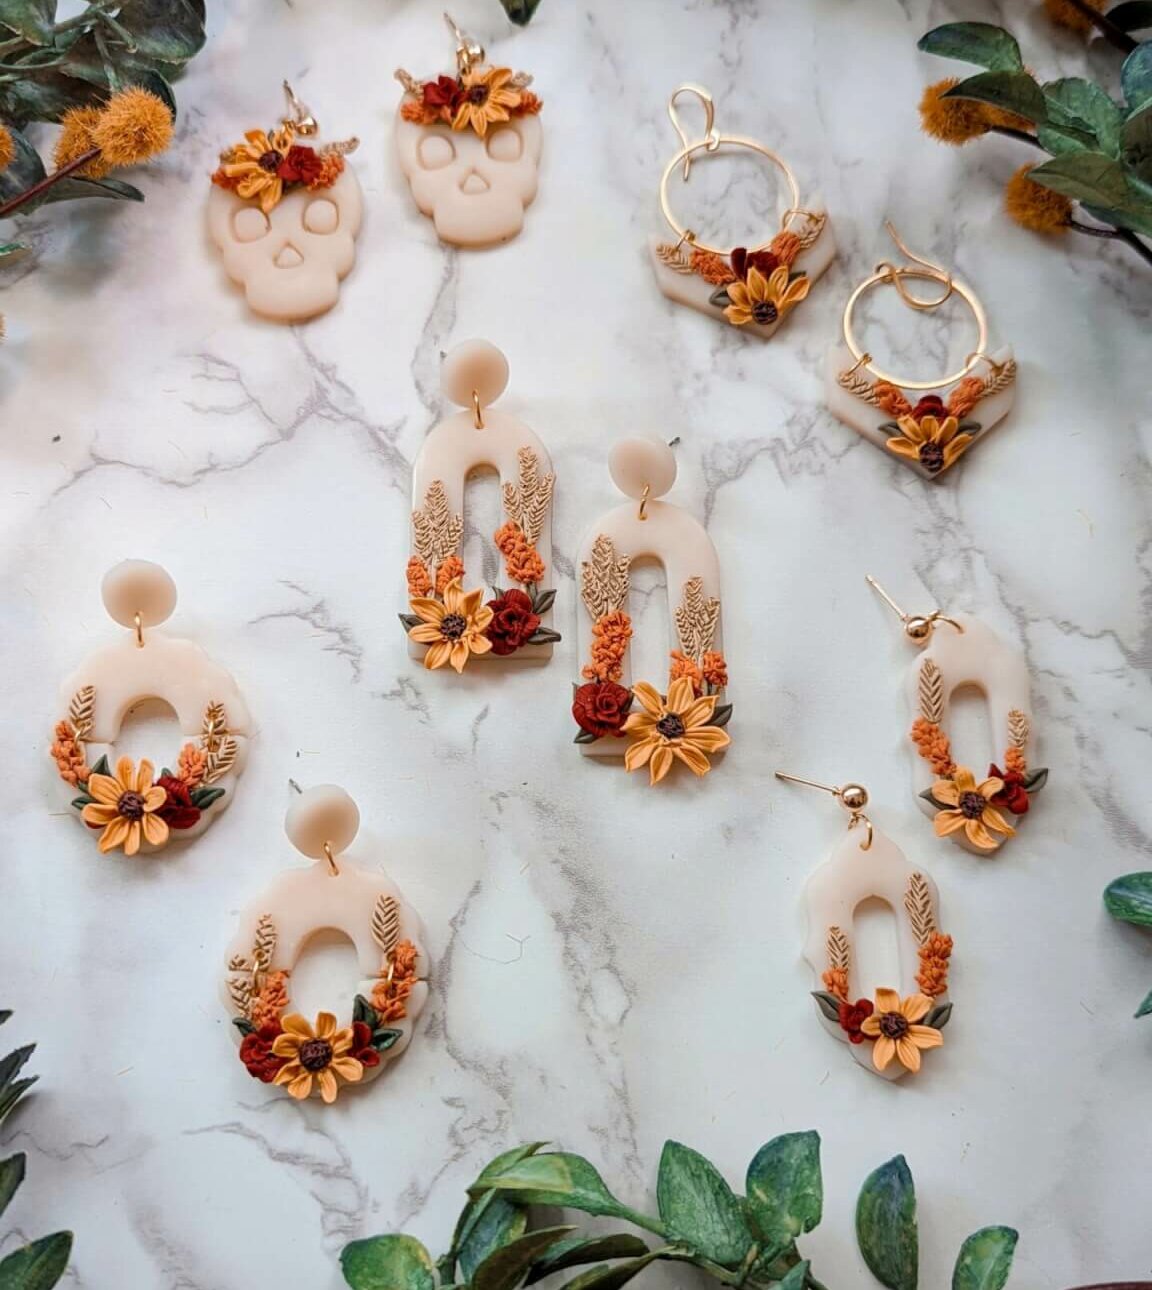 Earrings made of clay with fall flowers on them.